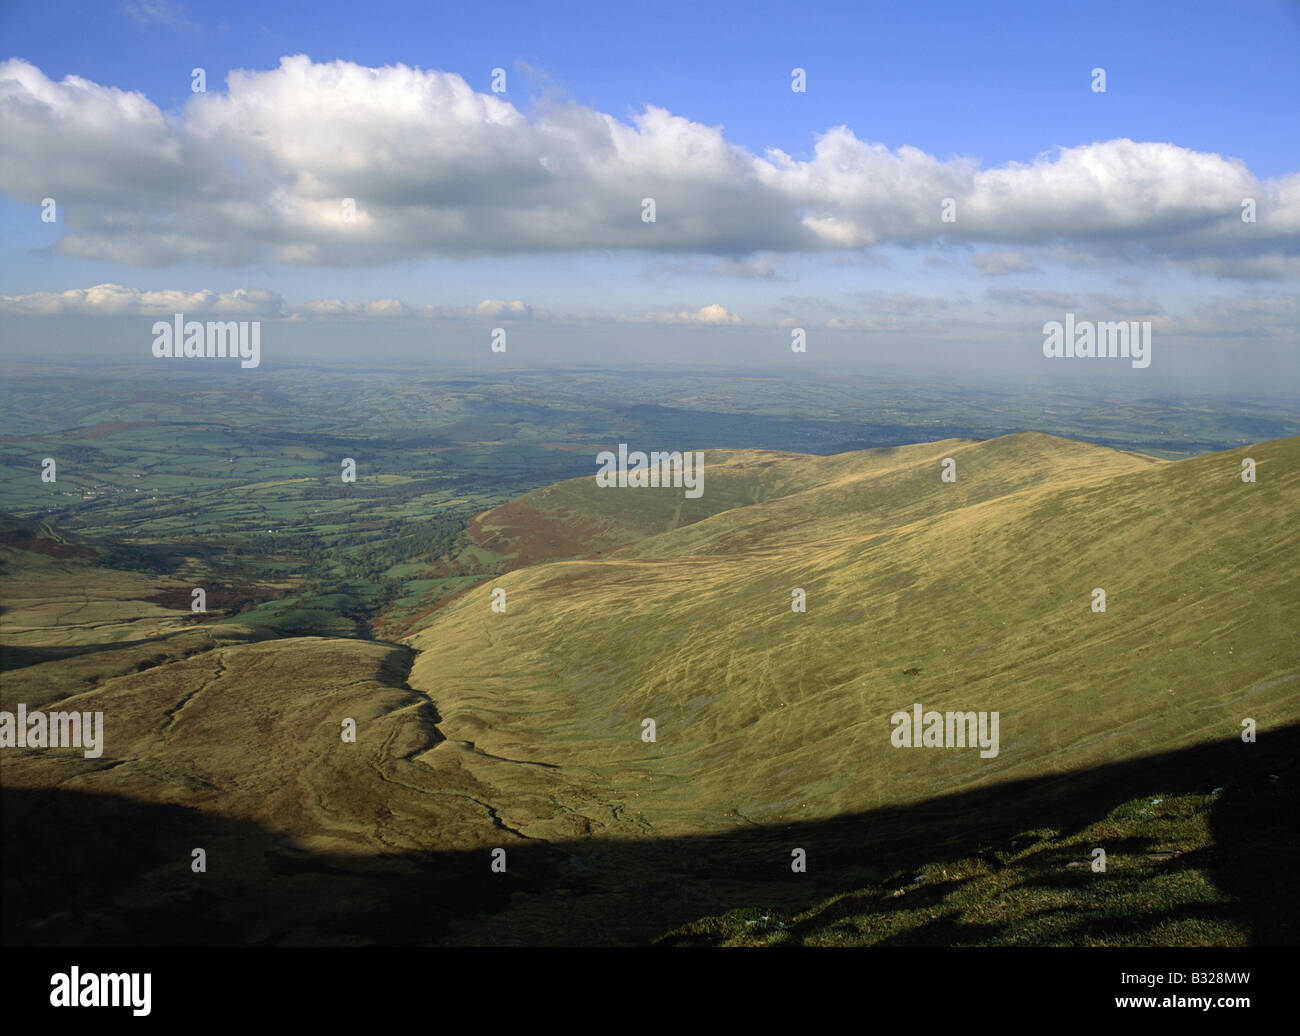 Views across the hills and valleys Cwm Llwch BRECON BEACONS POWYS WALES Stock Photo